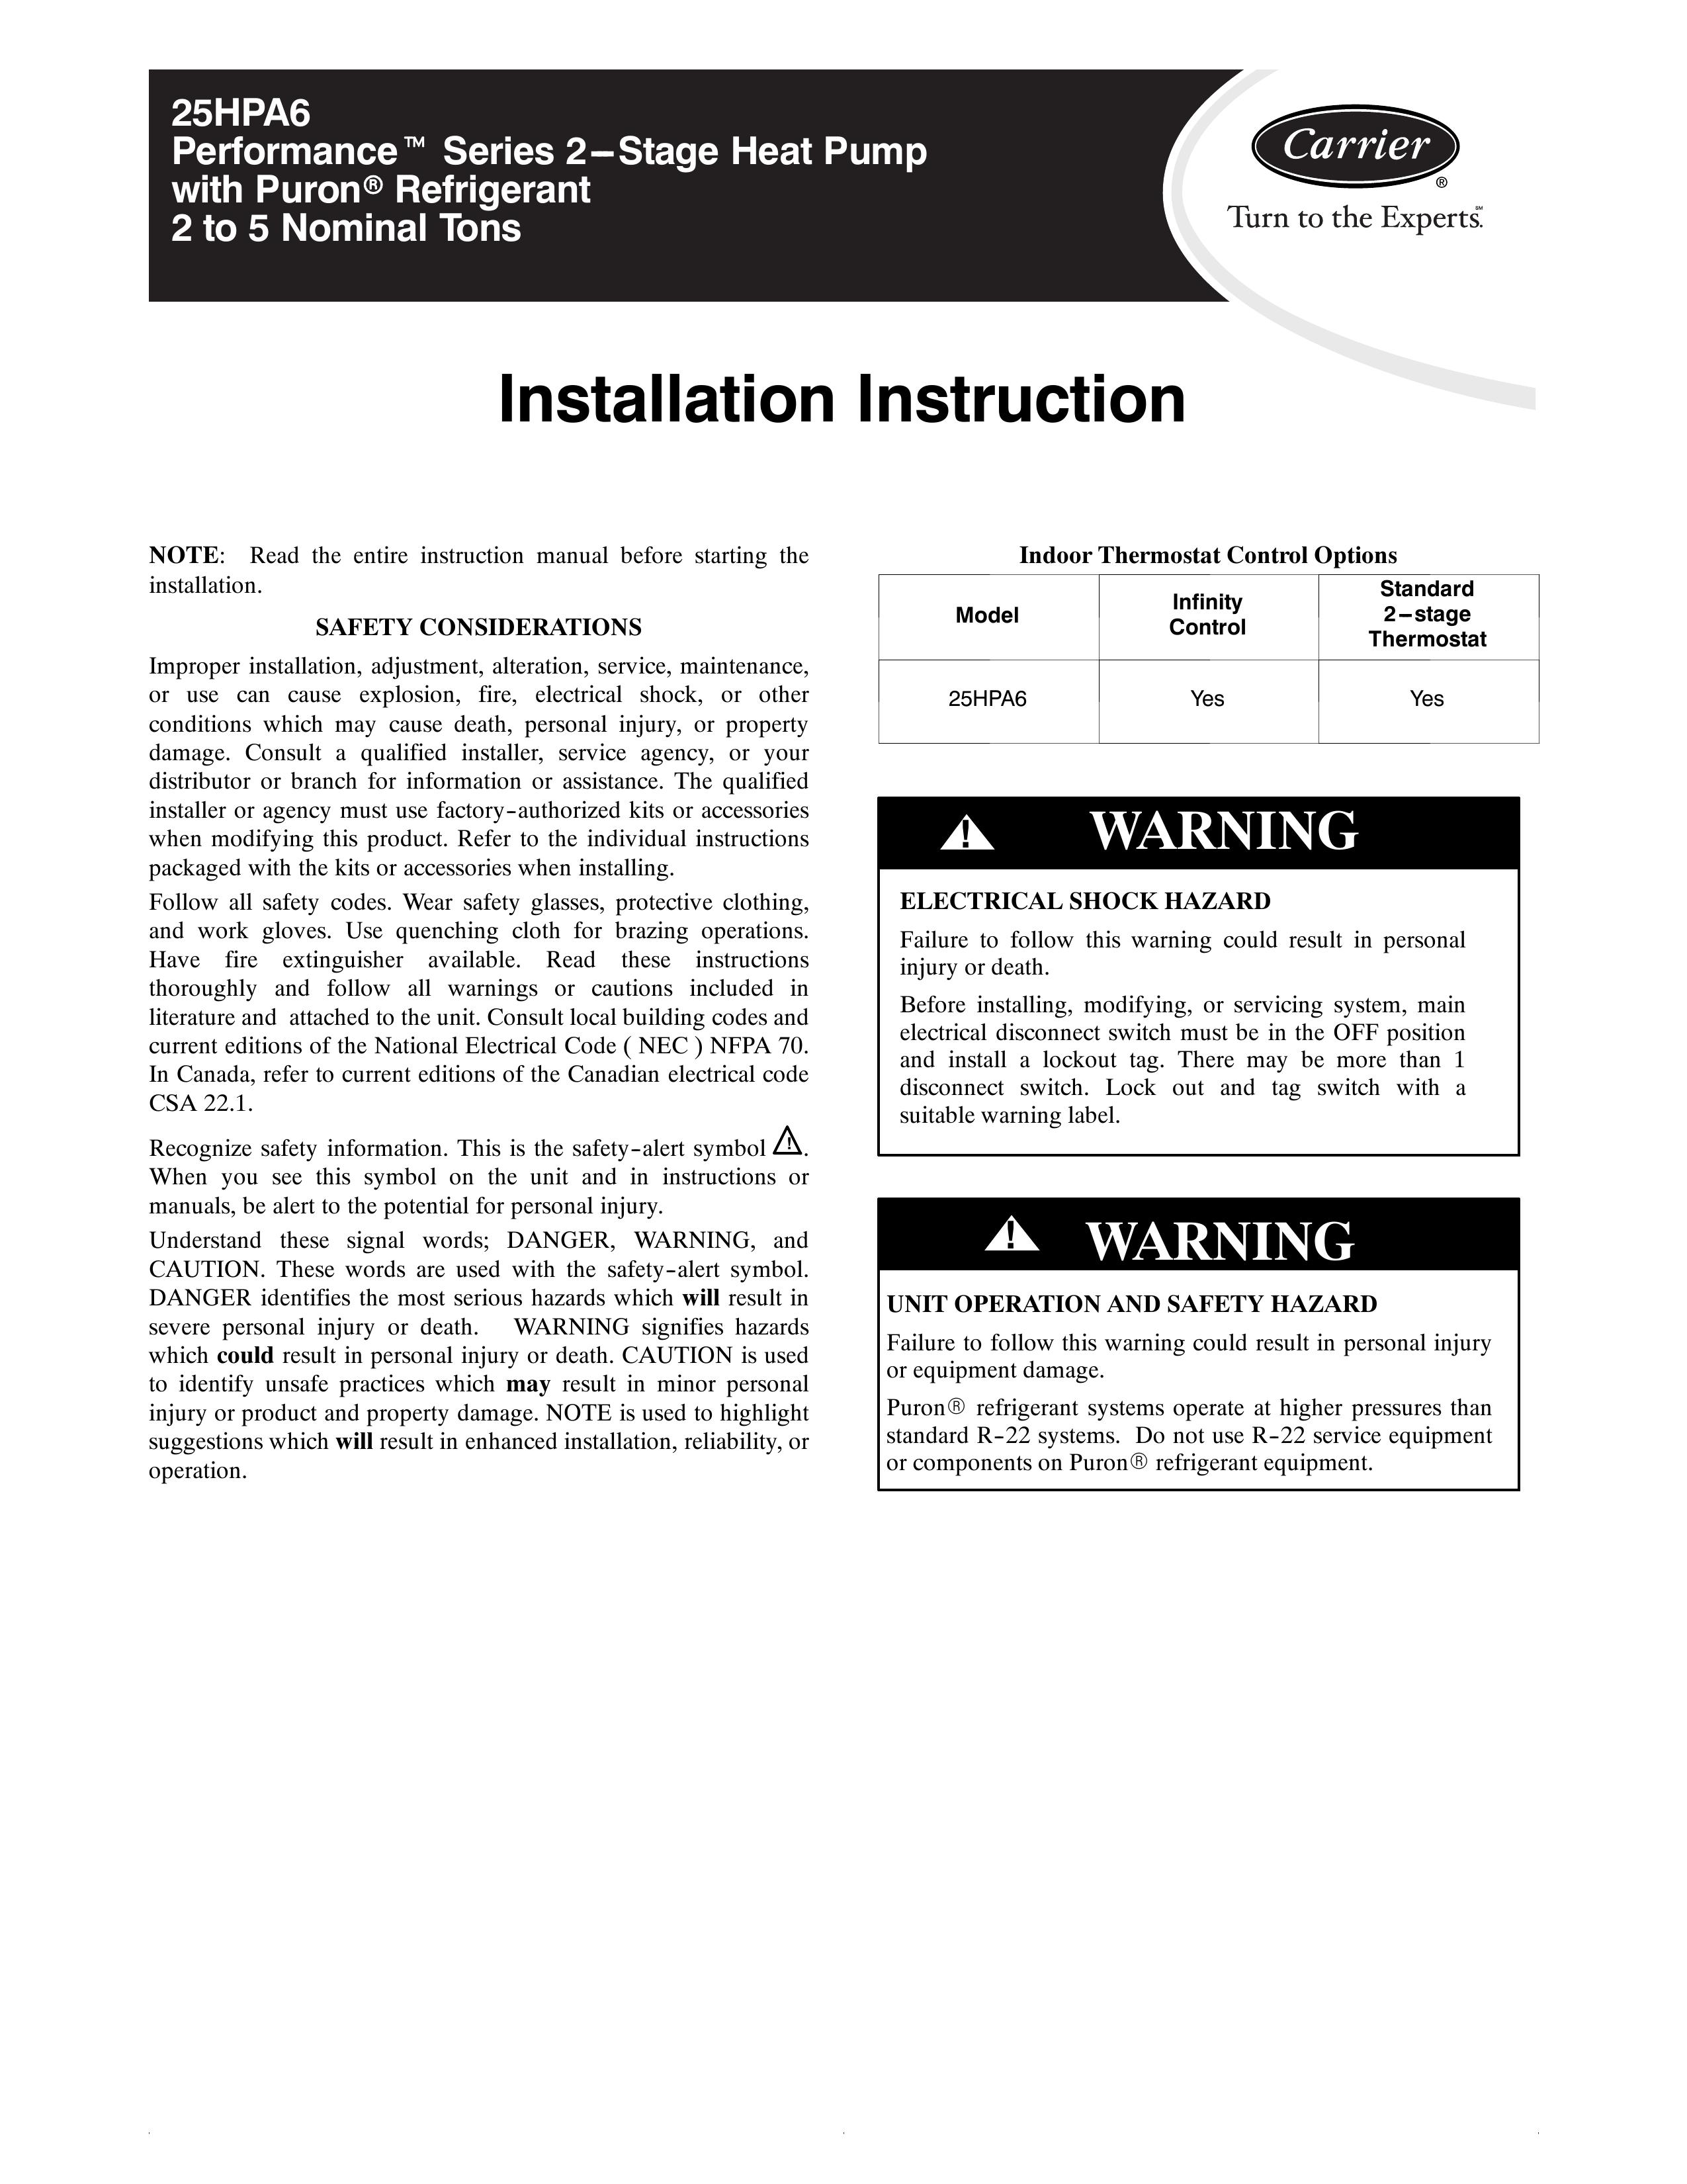 Carrier 25HPA6 Marine Heating System User Manual